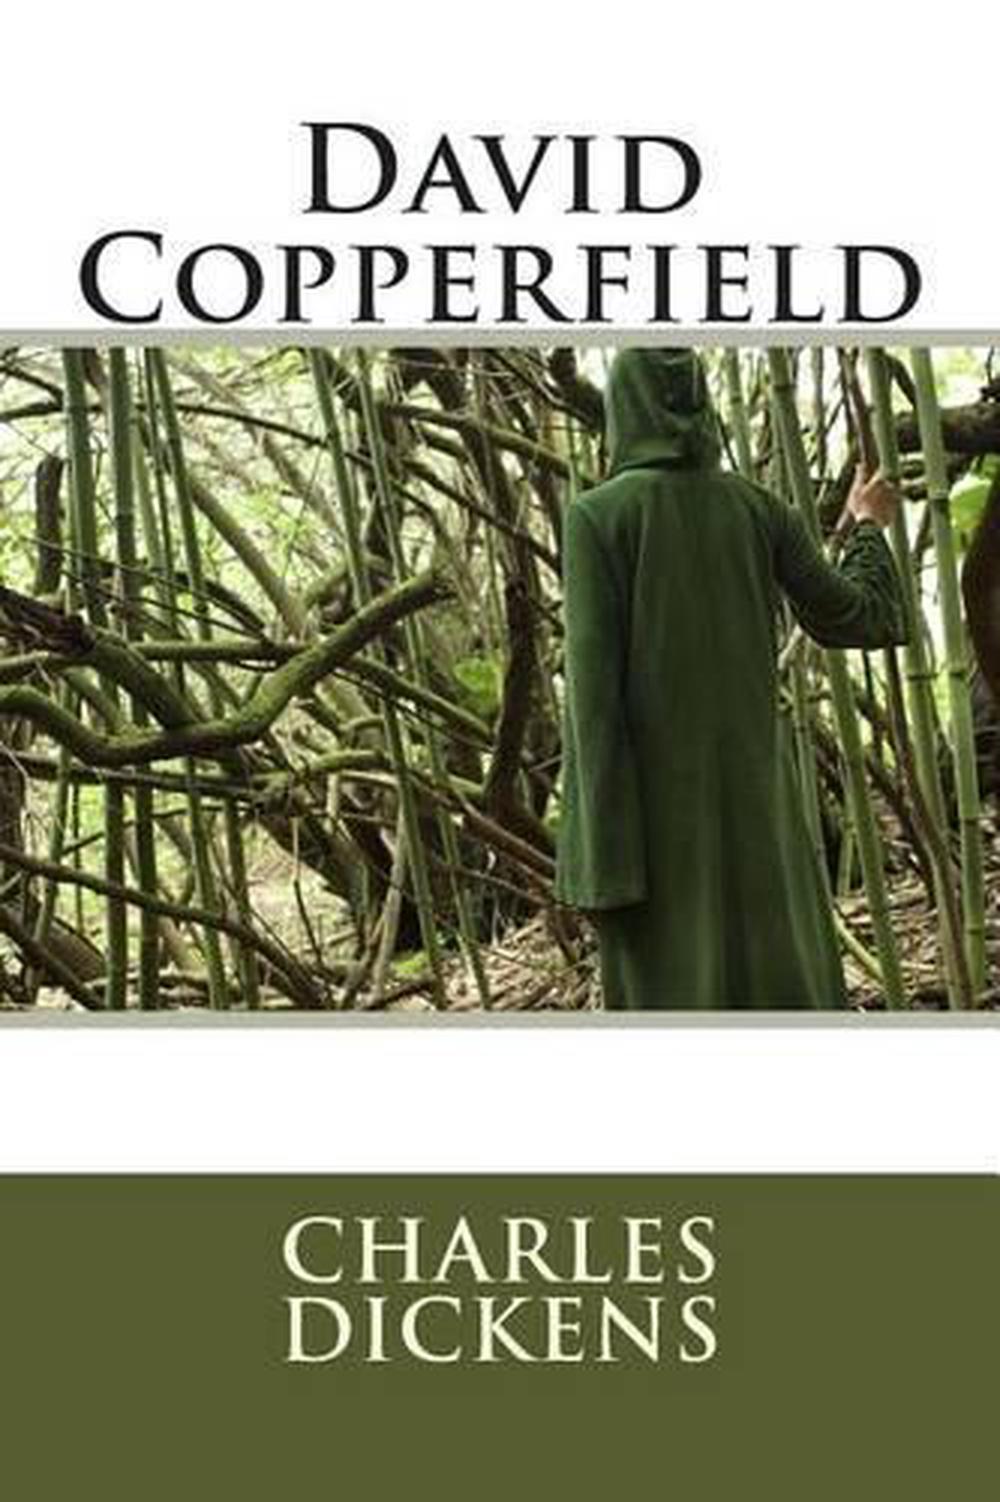 david copperfield charles dickens book